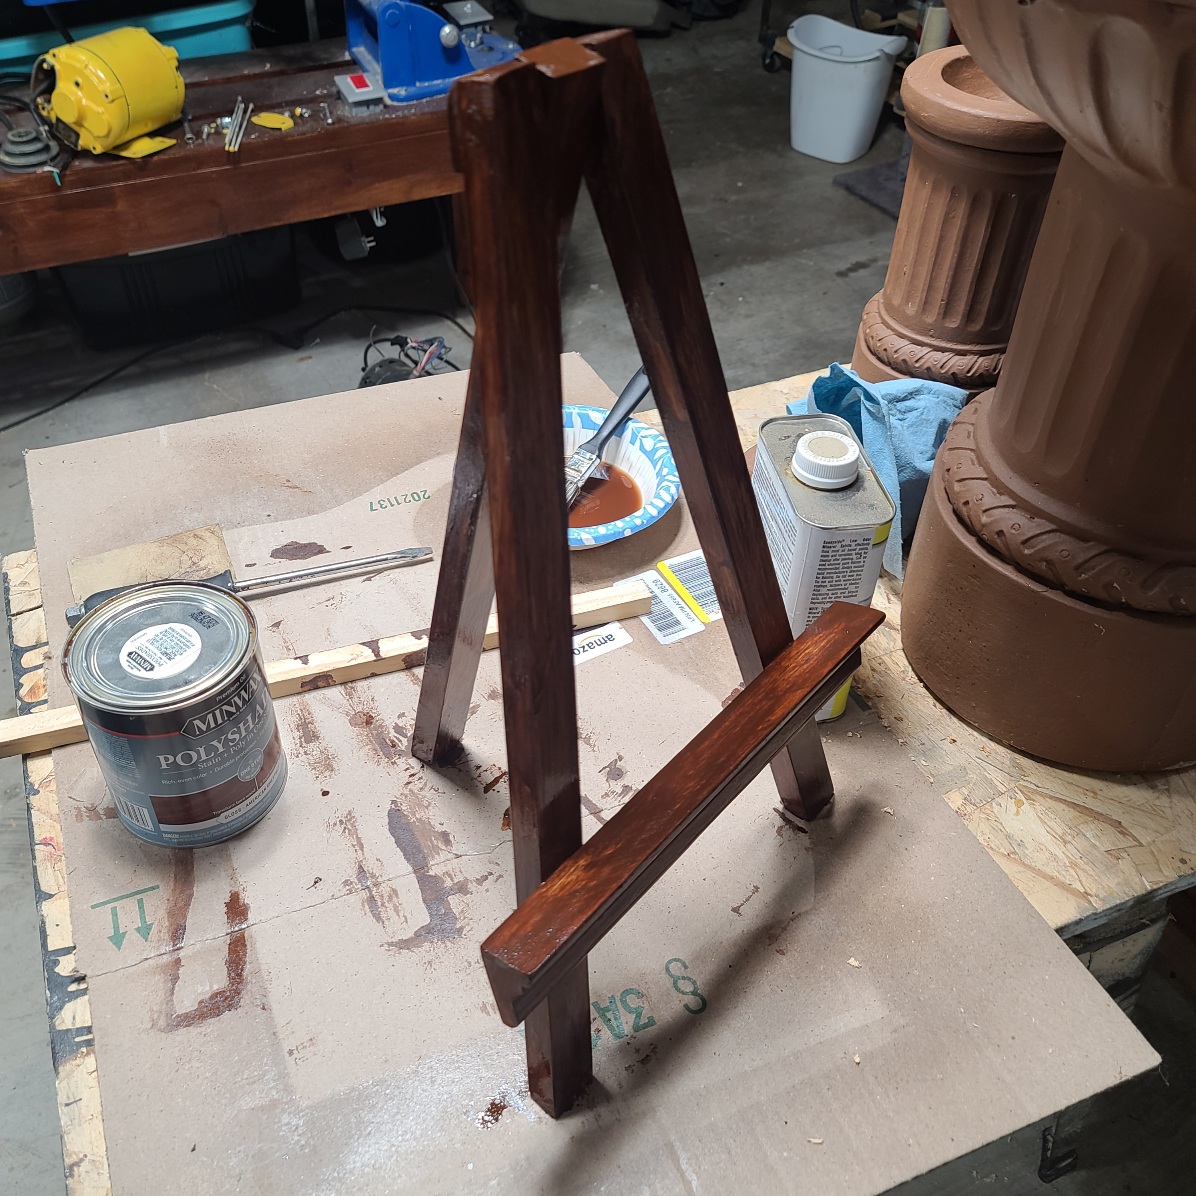 Zither stand